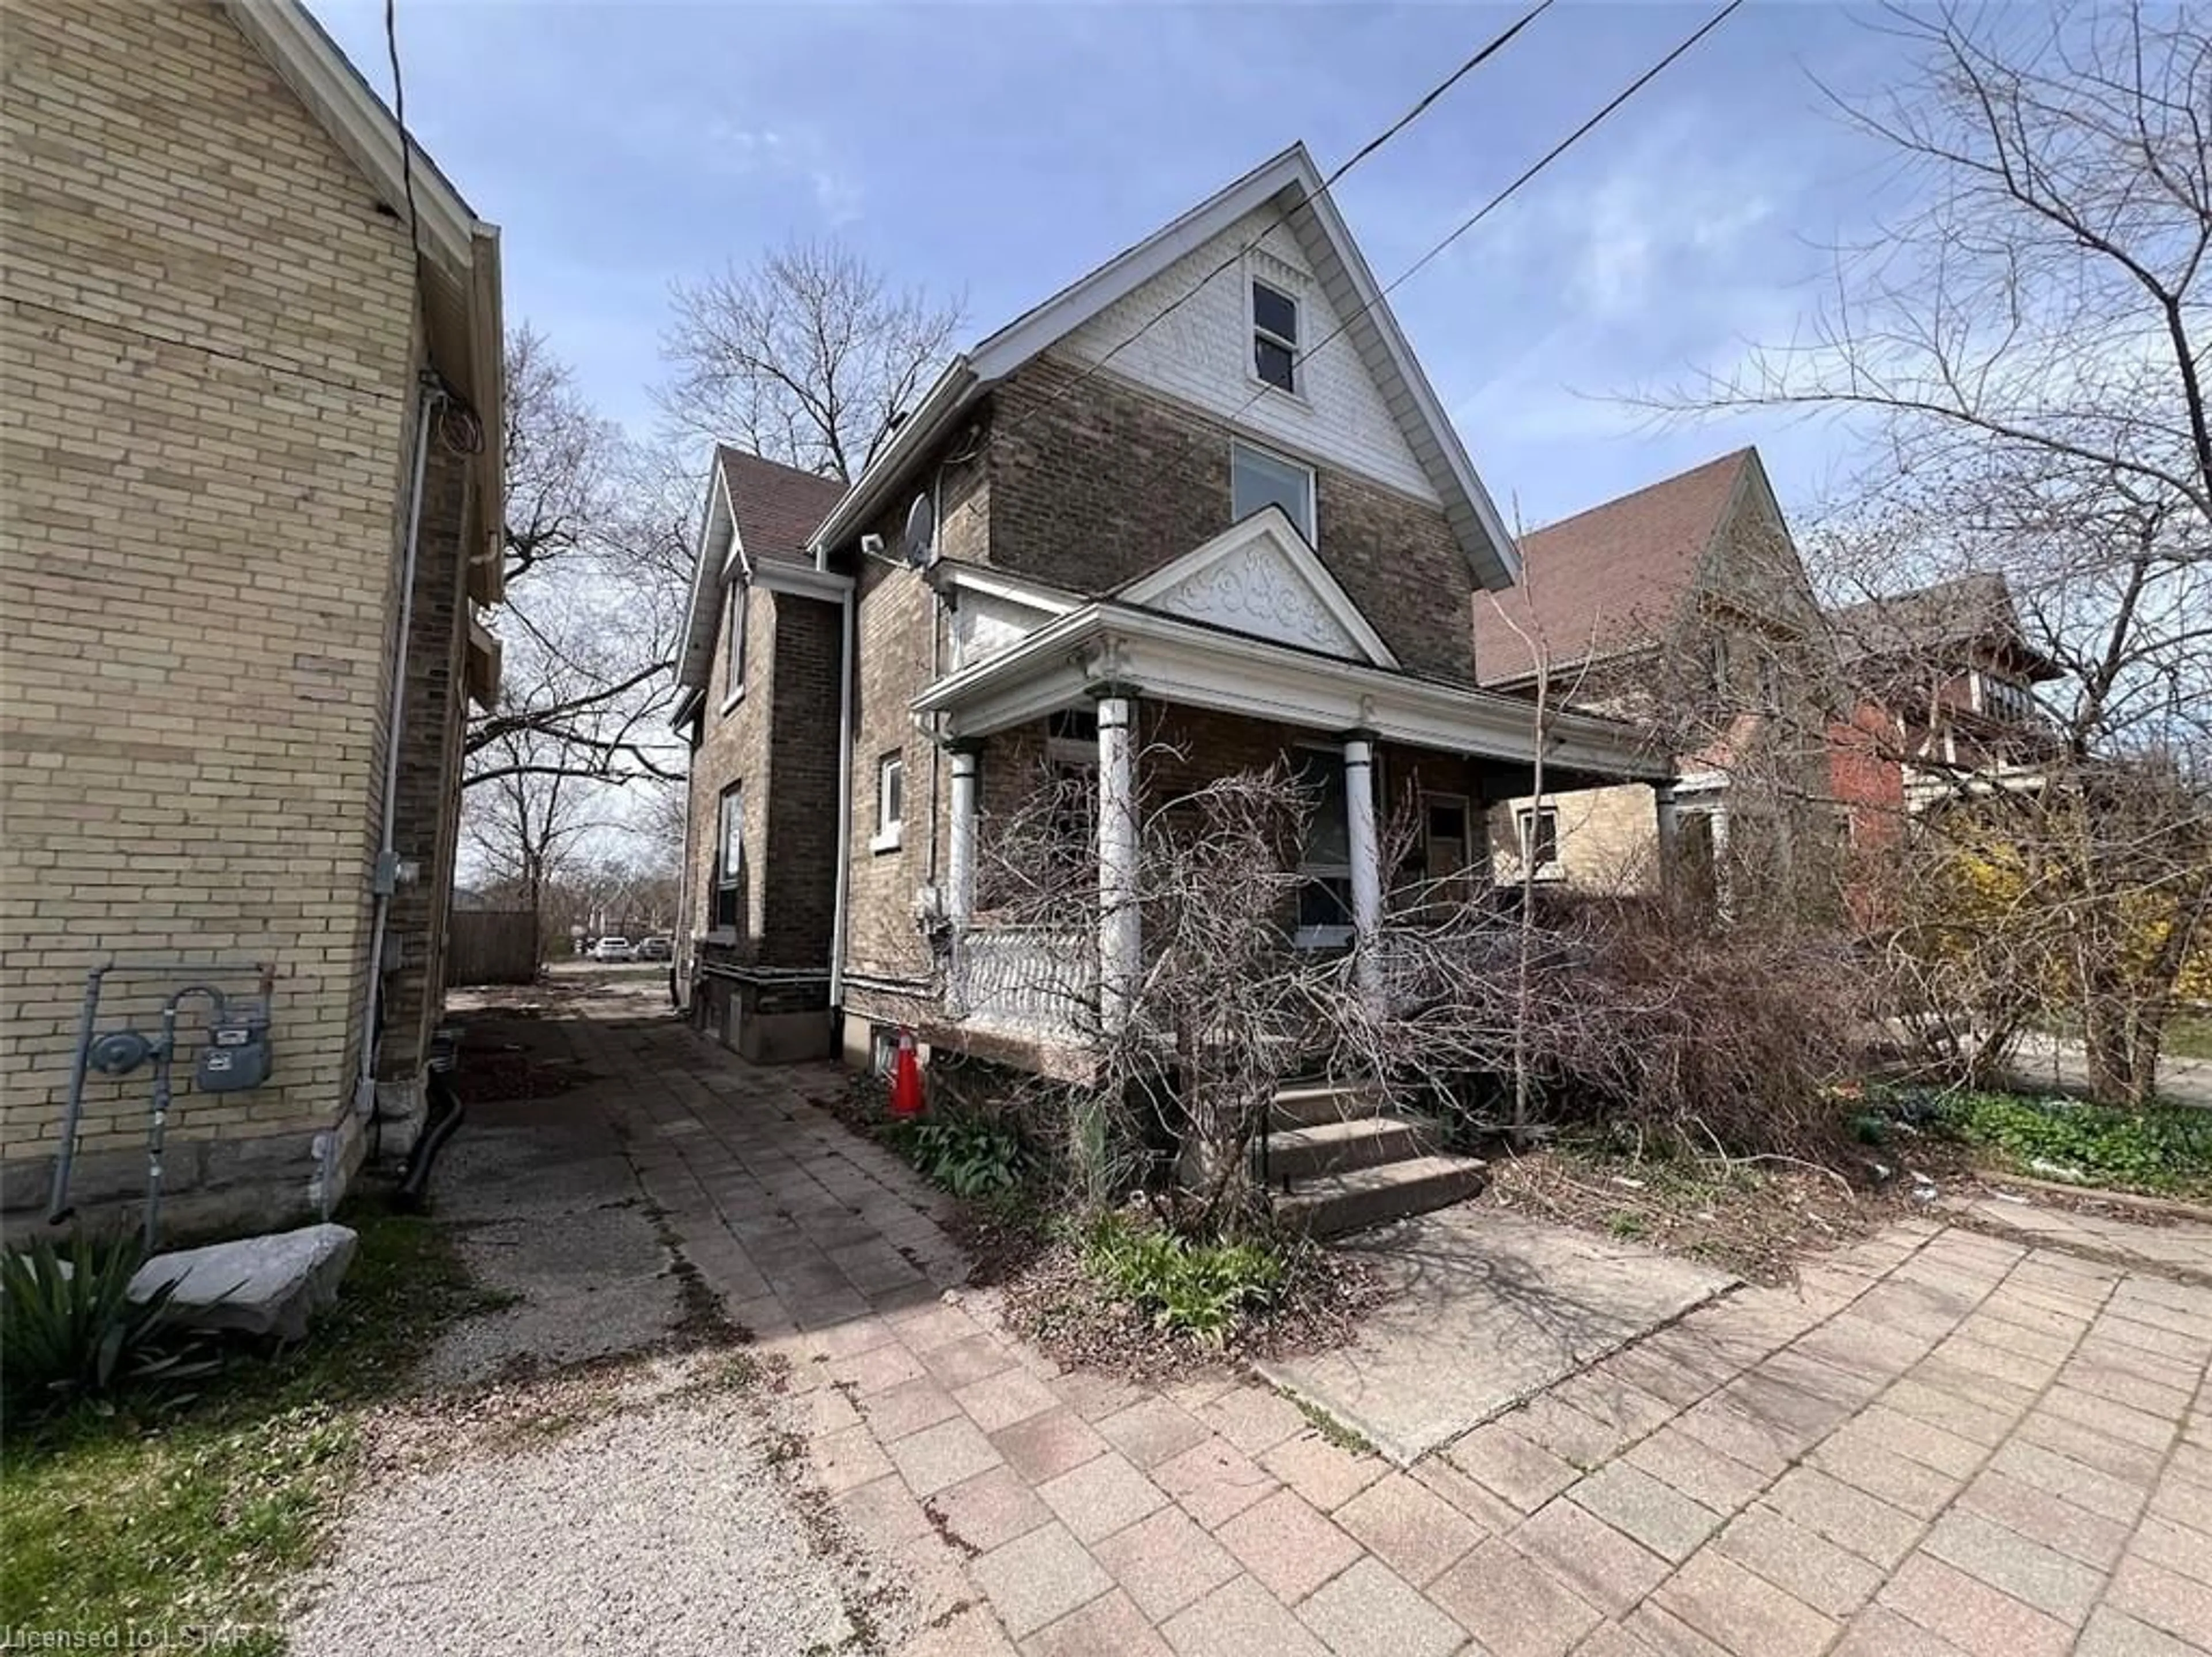 Frontside or backside of a home for 763 Colborne St, London Ontario N6A 3Z8